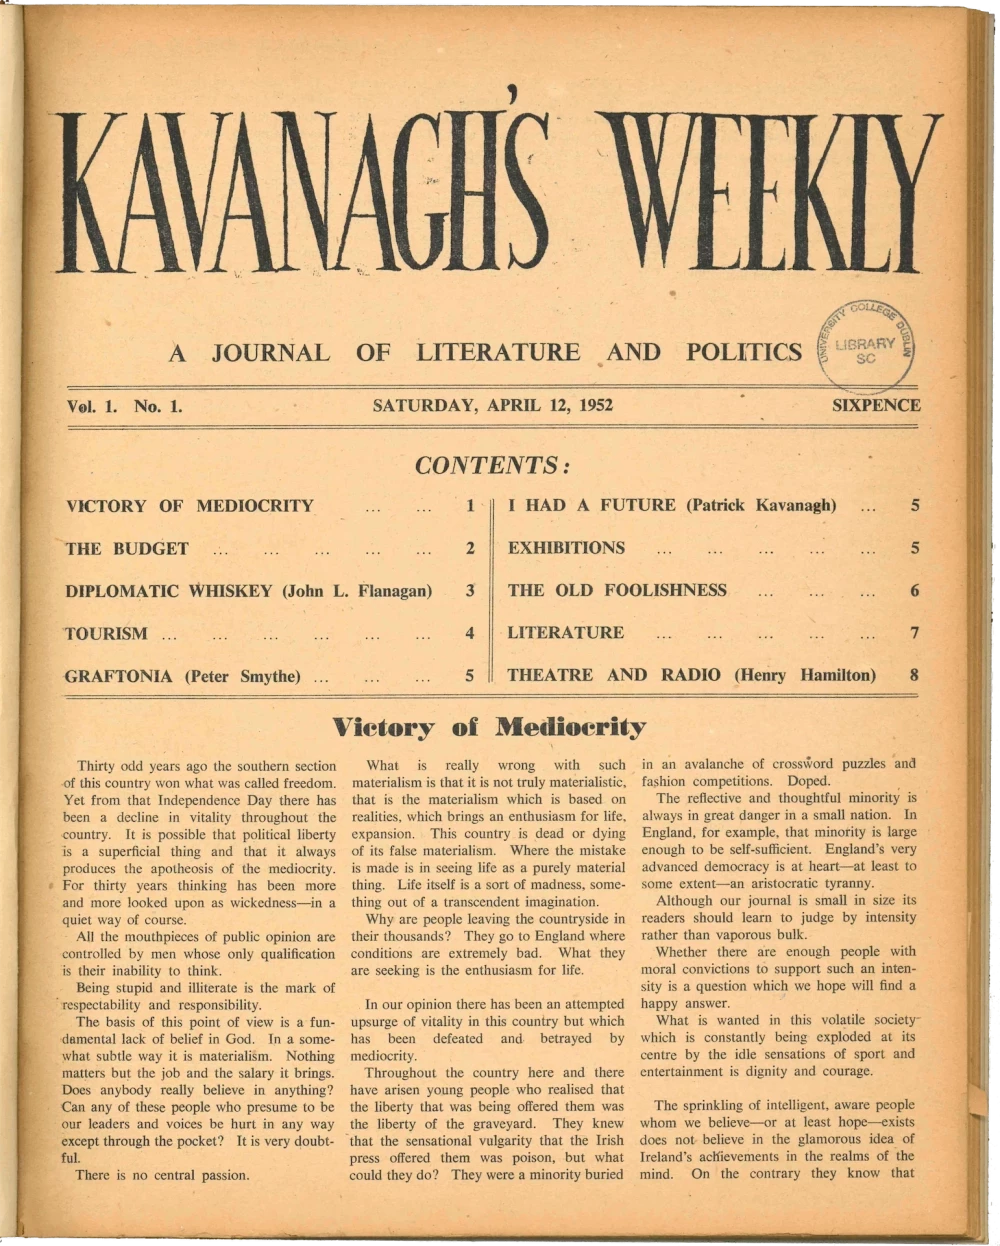 The first page from Kavanagh's Weekly, published 12 April 1952.